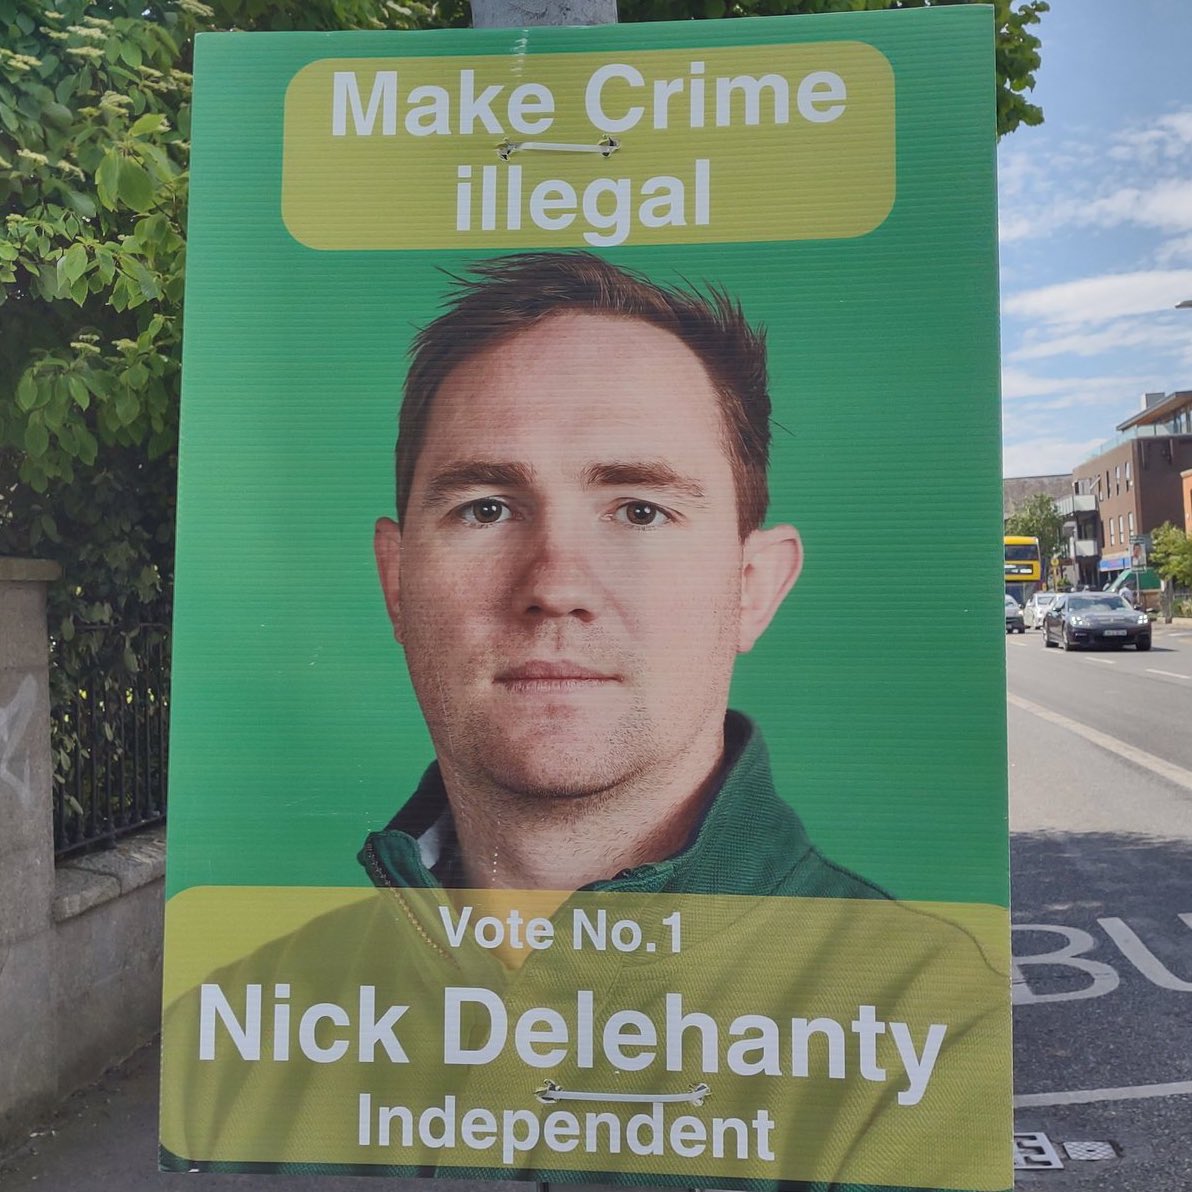 “Make crime illegal” says former Arthur Cox solicitor running for election 🤔 🤨